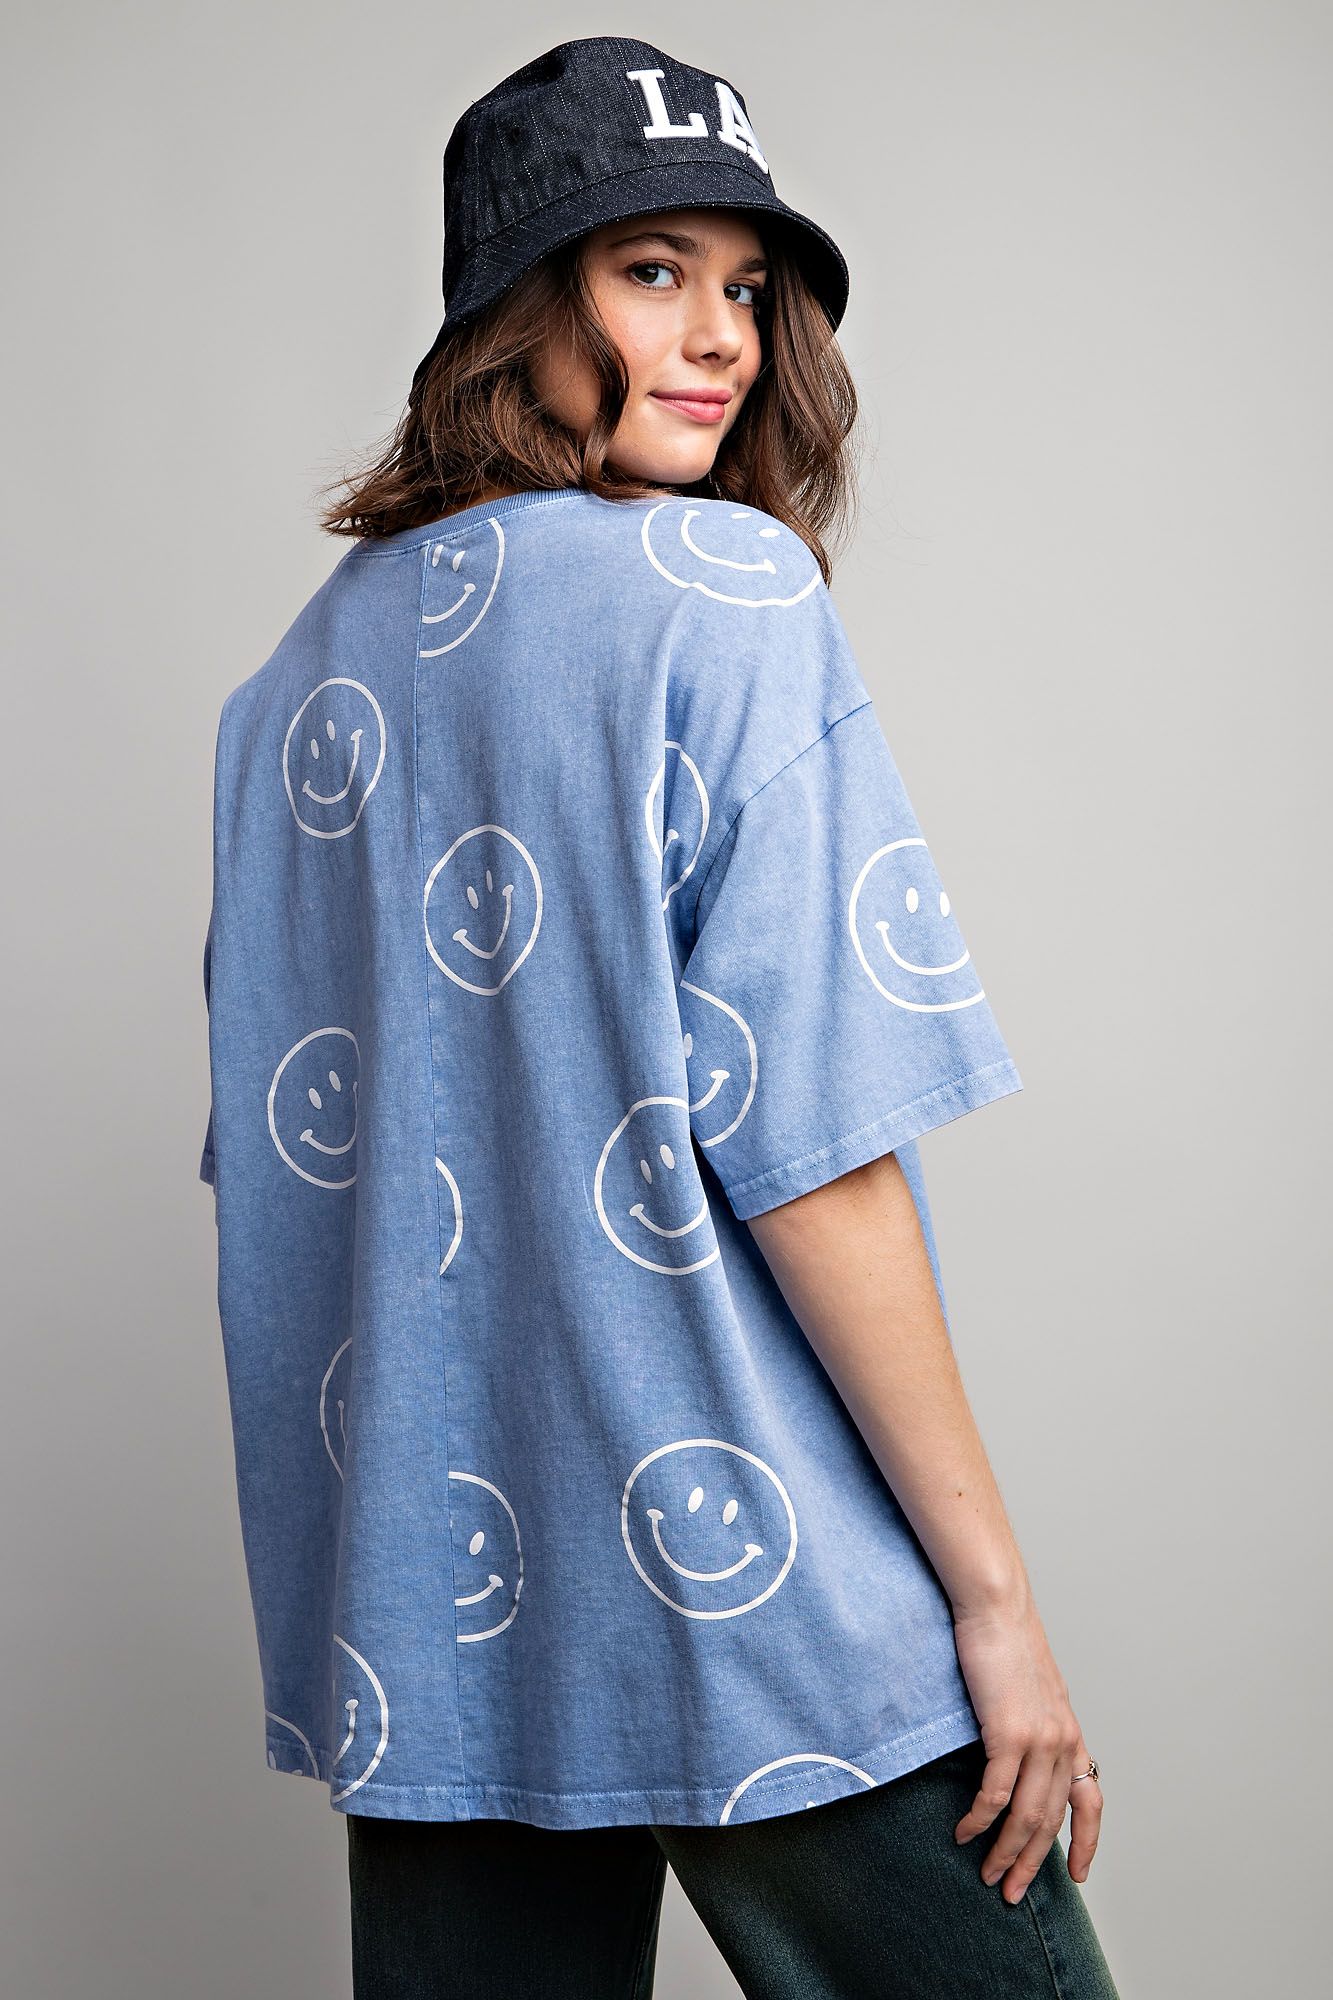 PERI BLUE SMILEY FACE PRINTED WASHED TOP